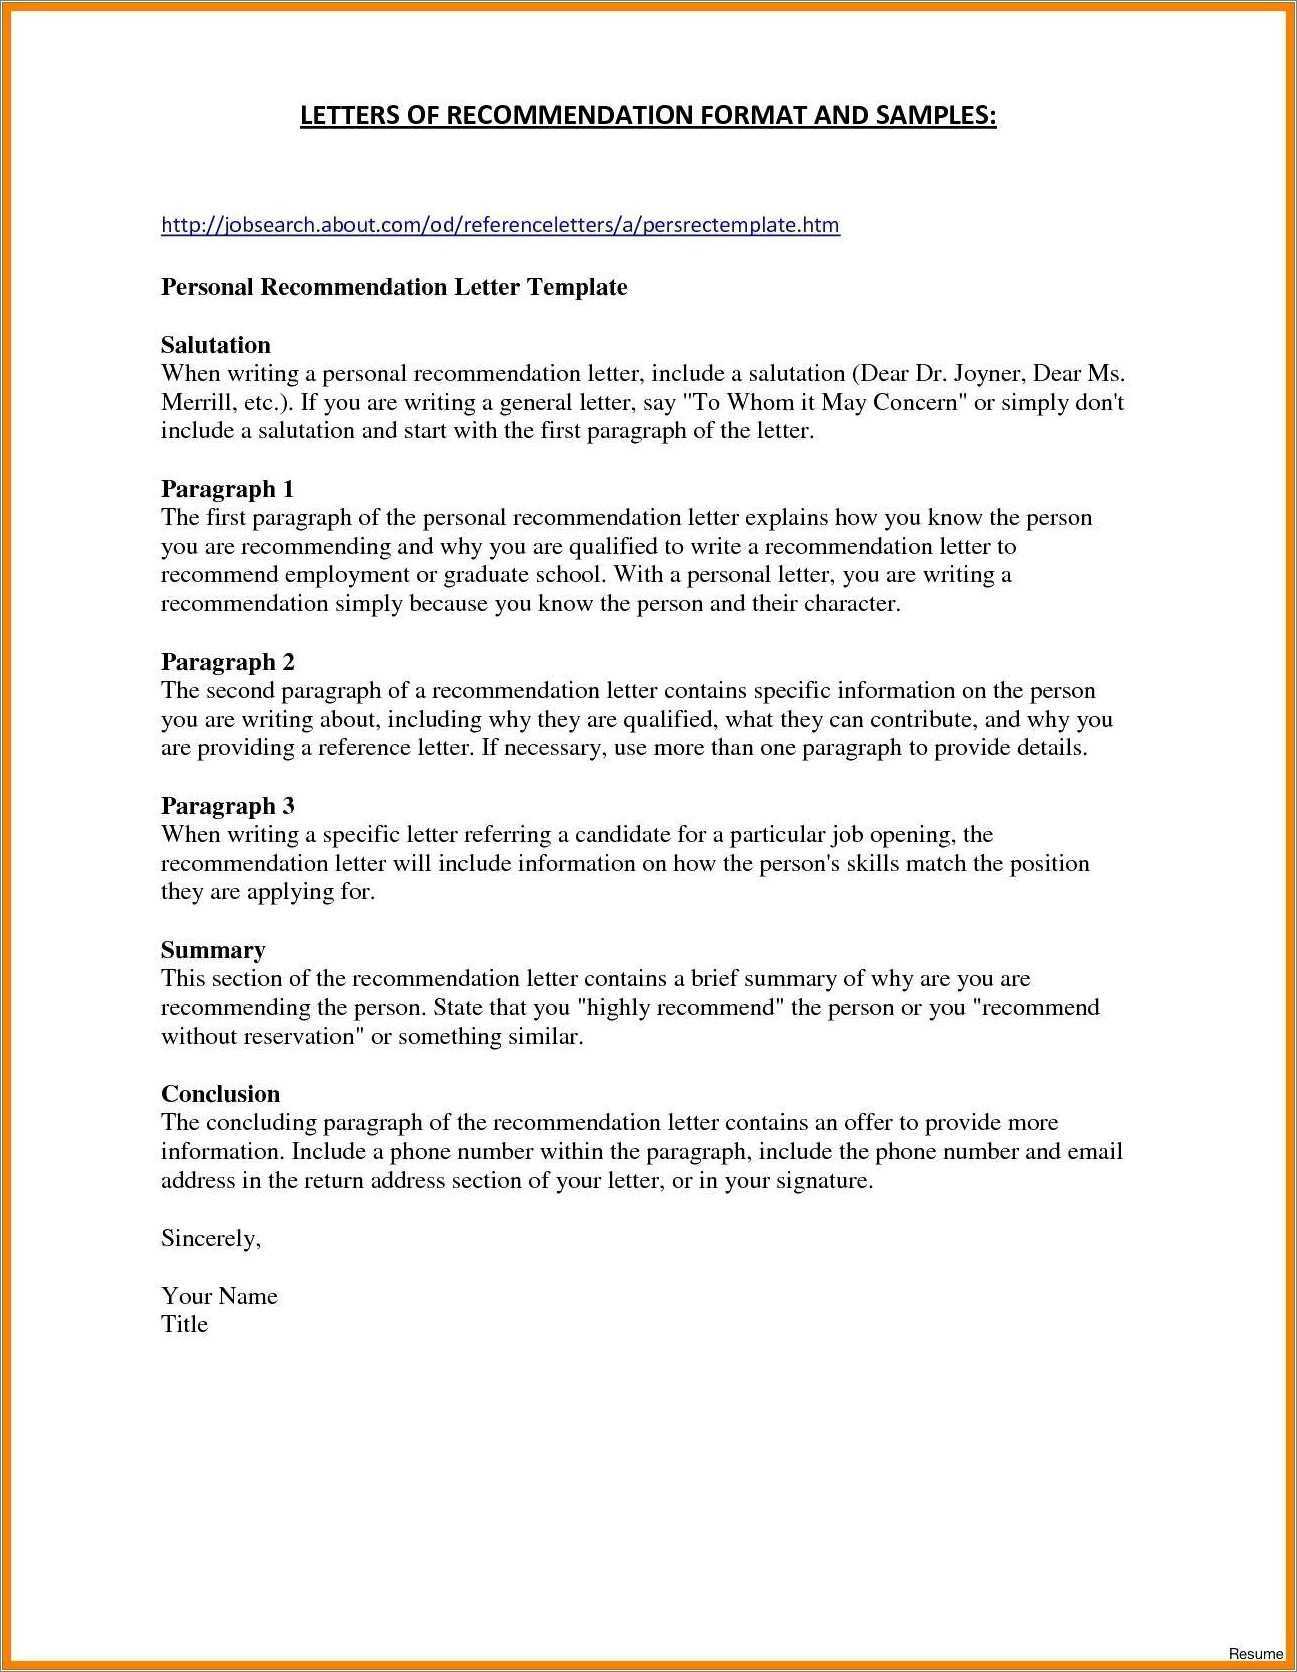 Resume For Letter Of Recommendation Template Resume Example Gallery